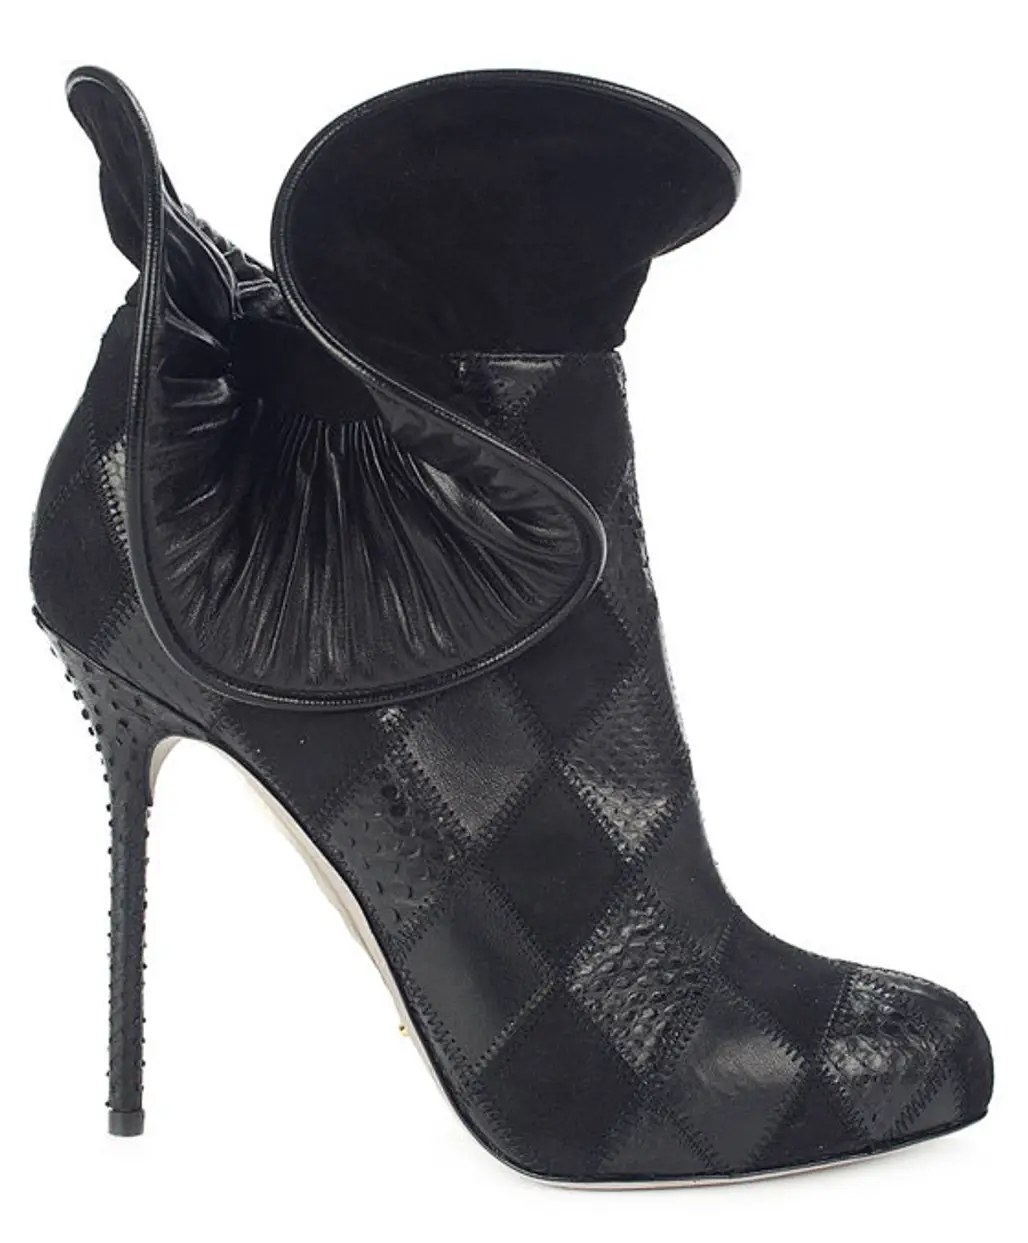 Black Ruffle Bootie by Sergio Rossi